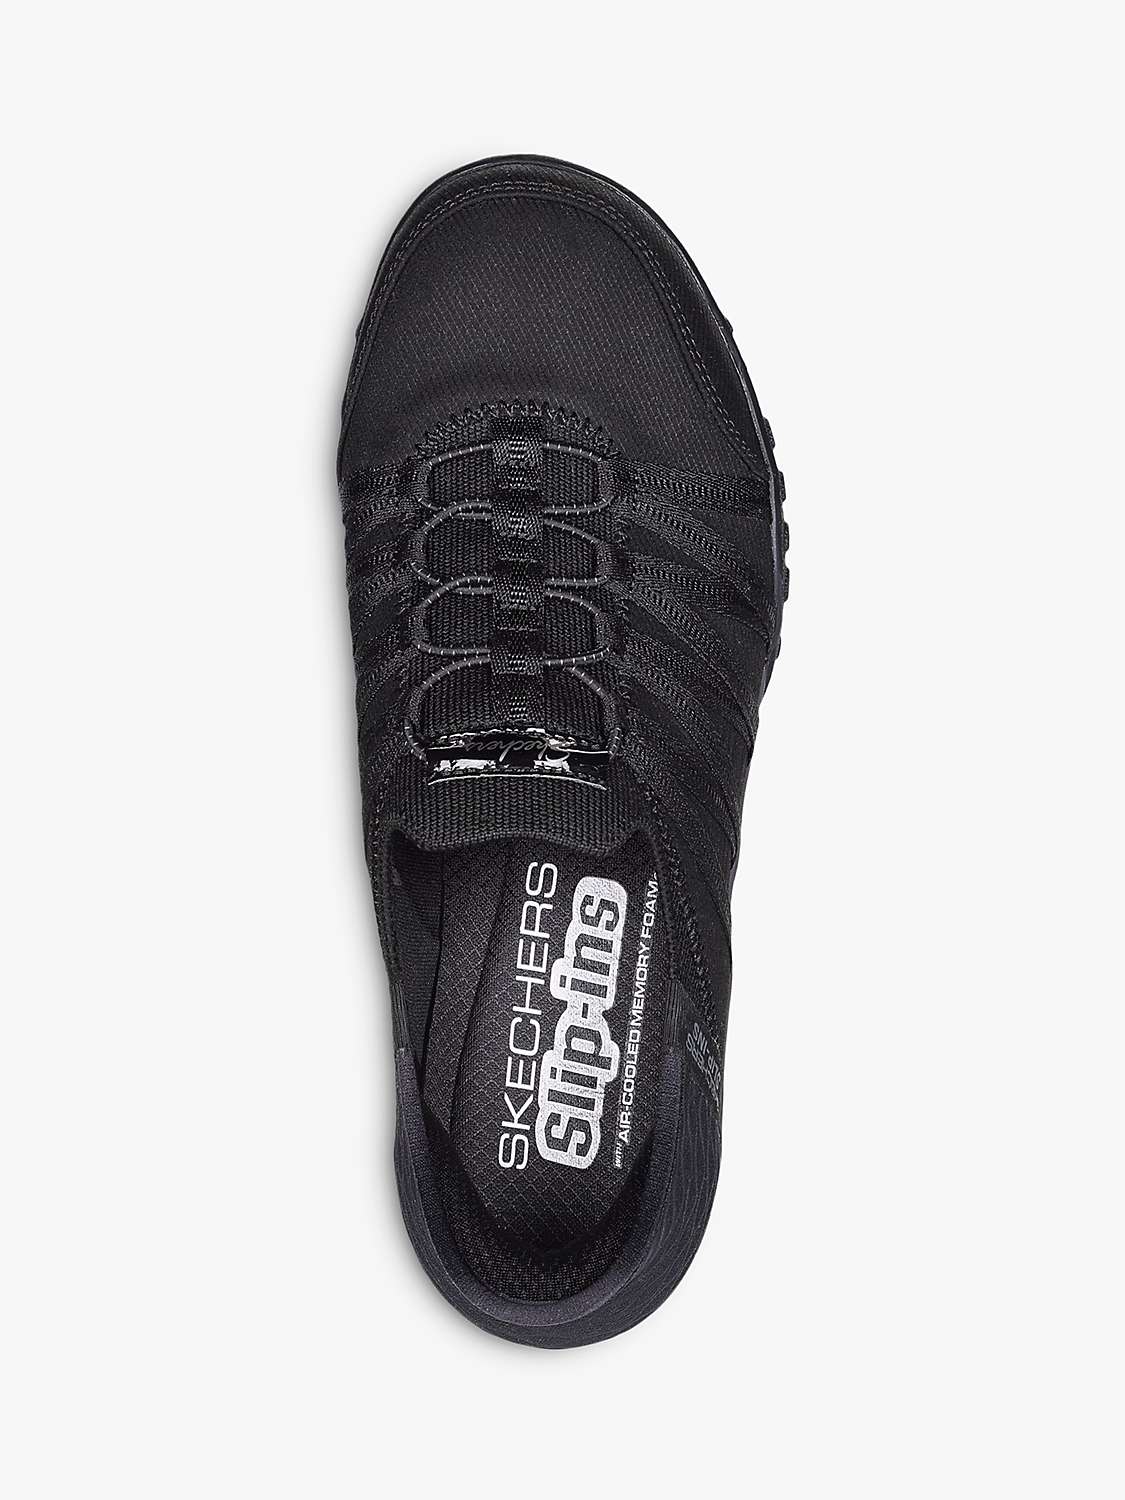 Buy Skechers Breathe Easy Roll With Me Trainers Online at johnlewis.com